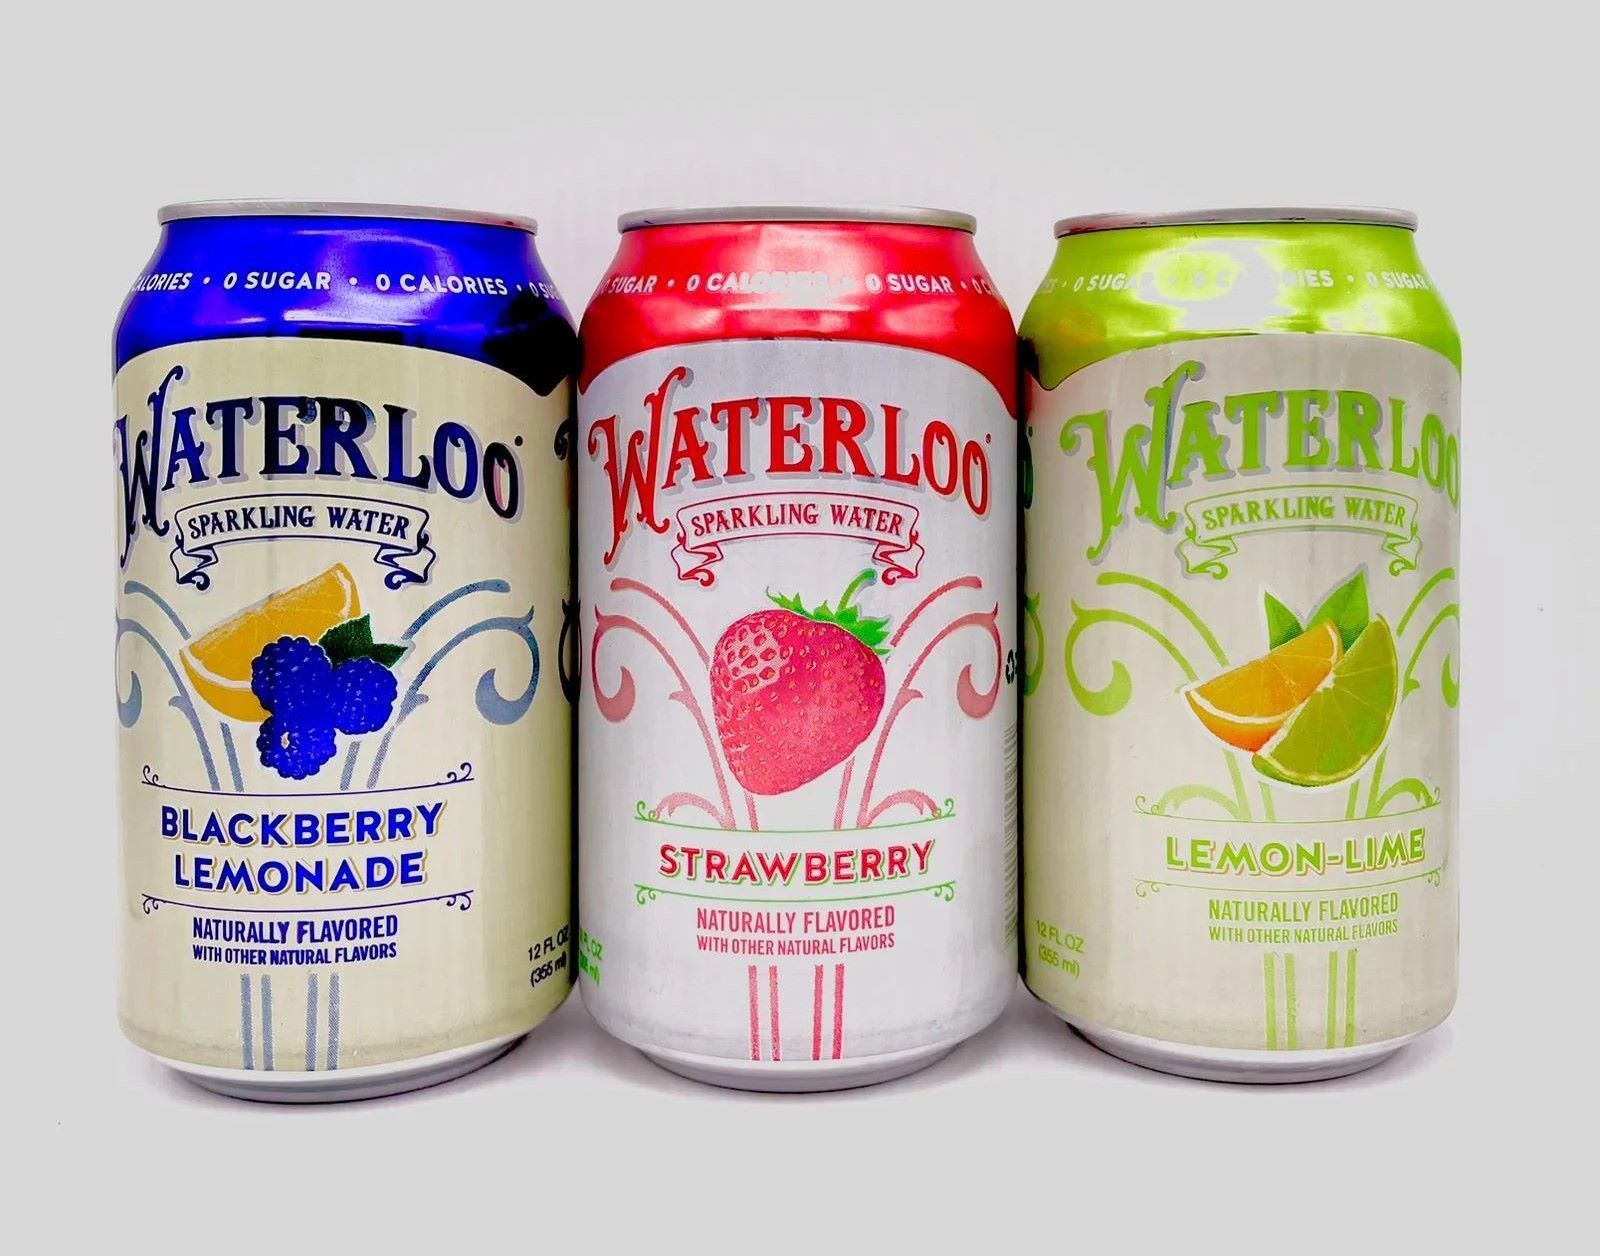 19-waterloo-sparkling-water-nutrition-facts